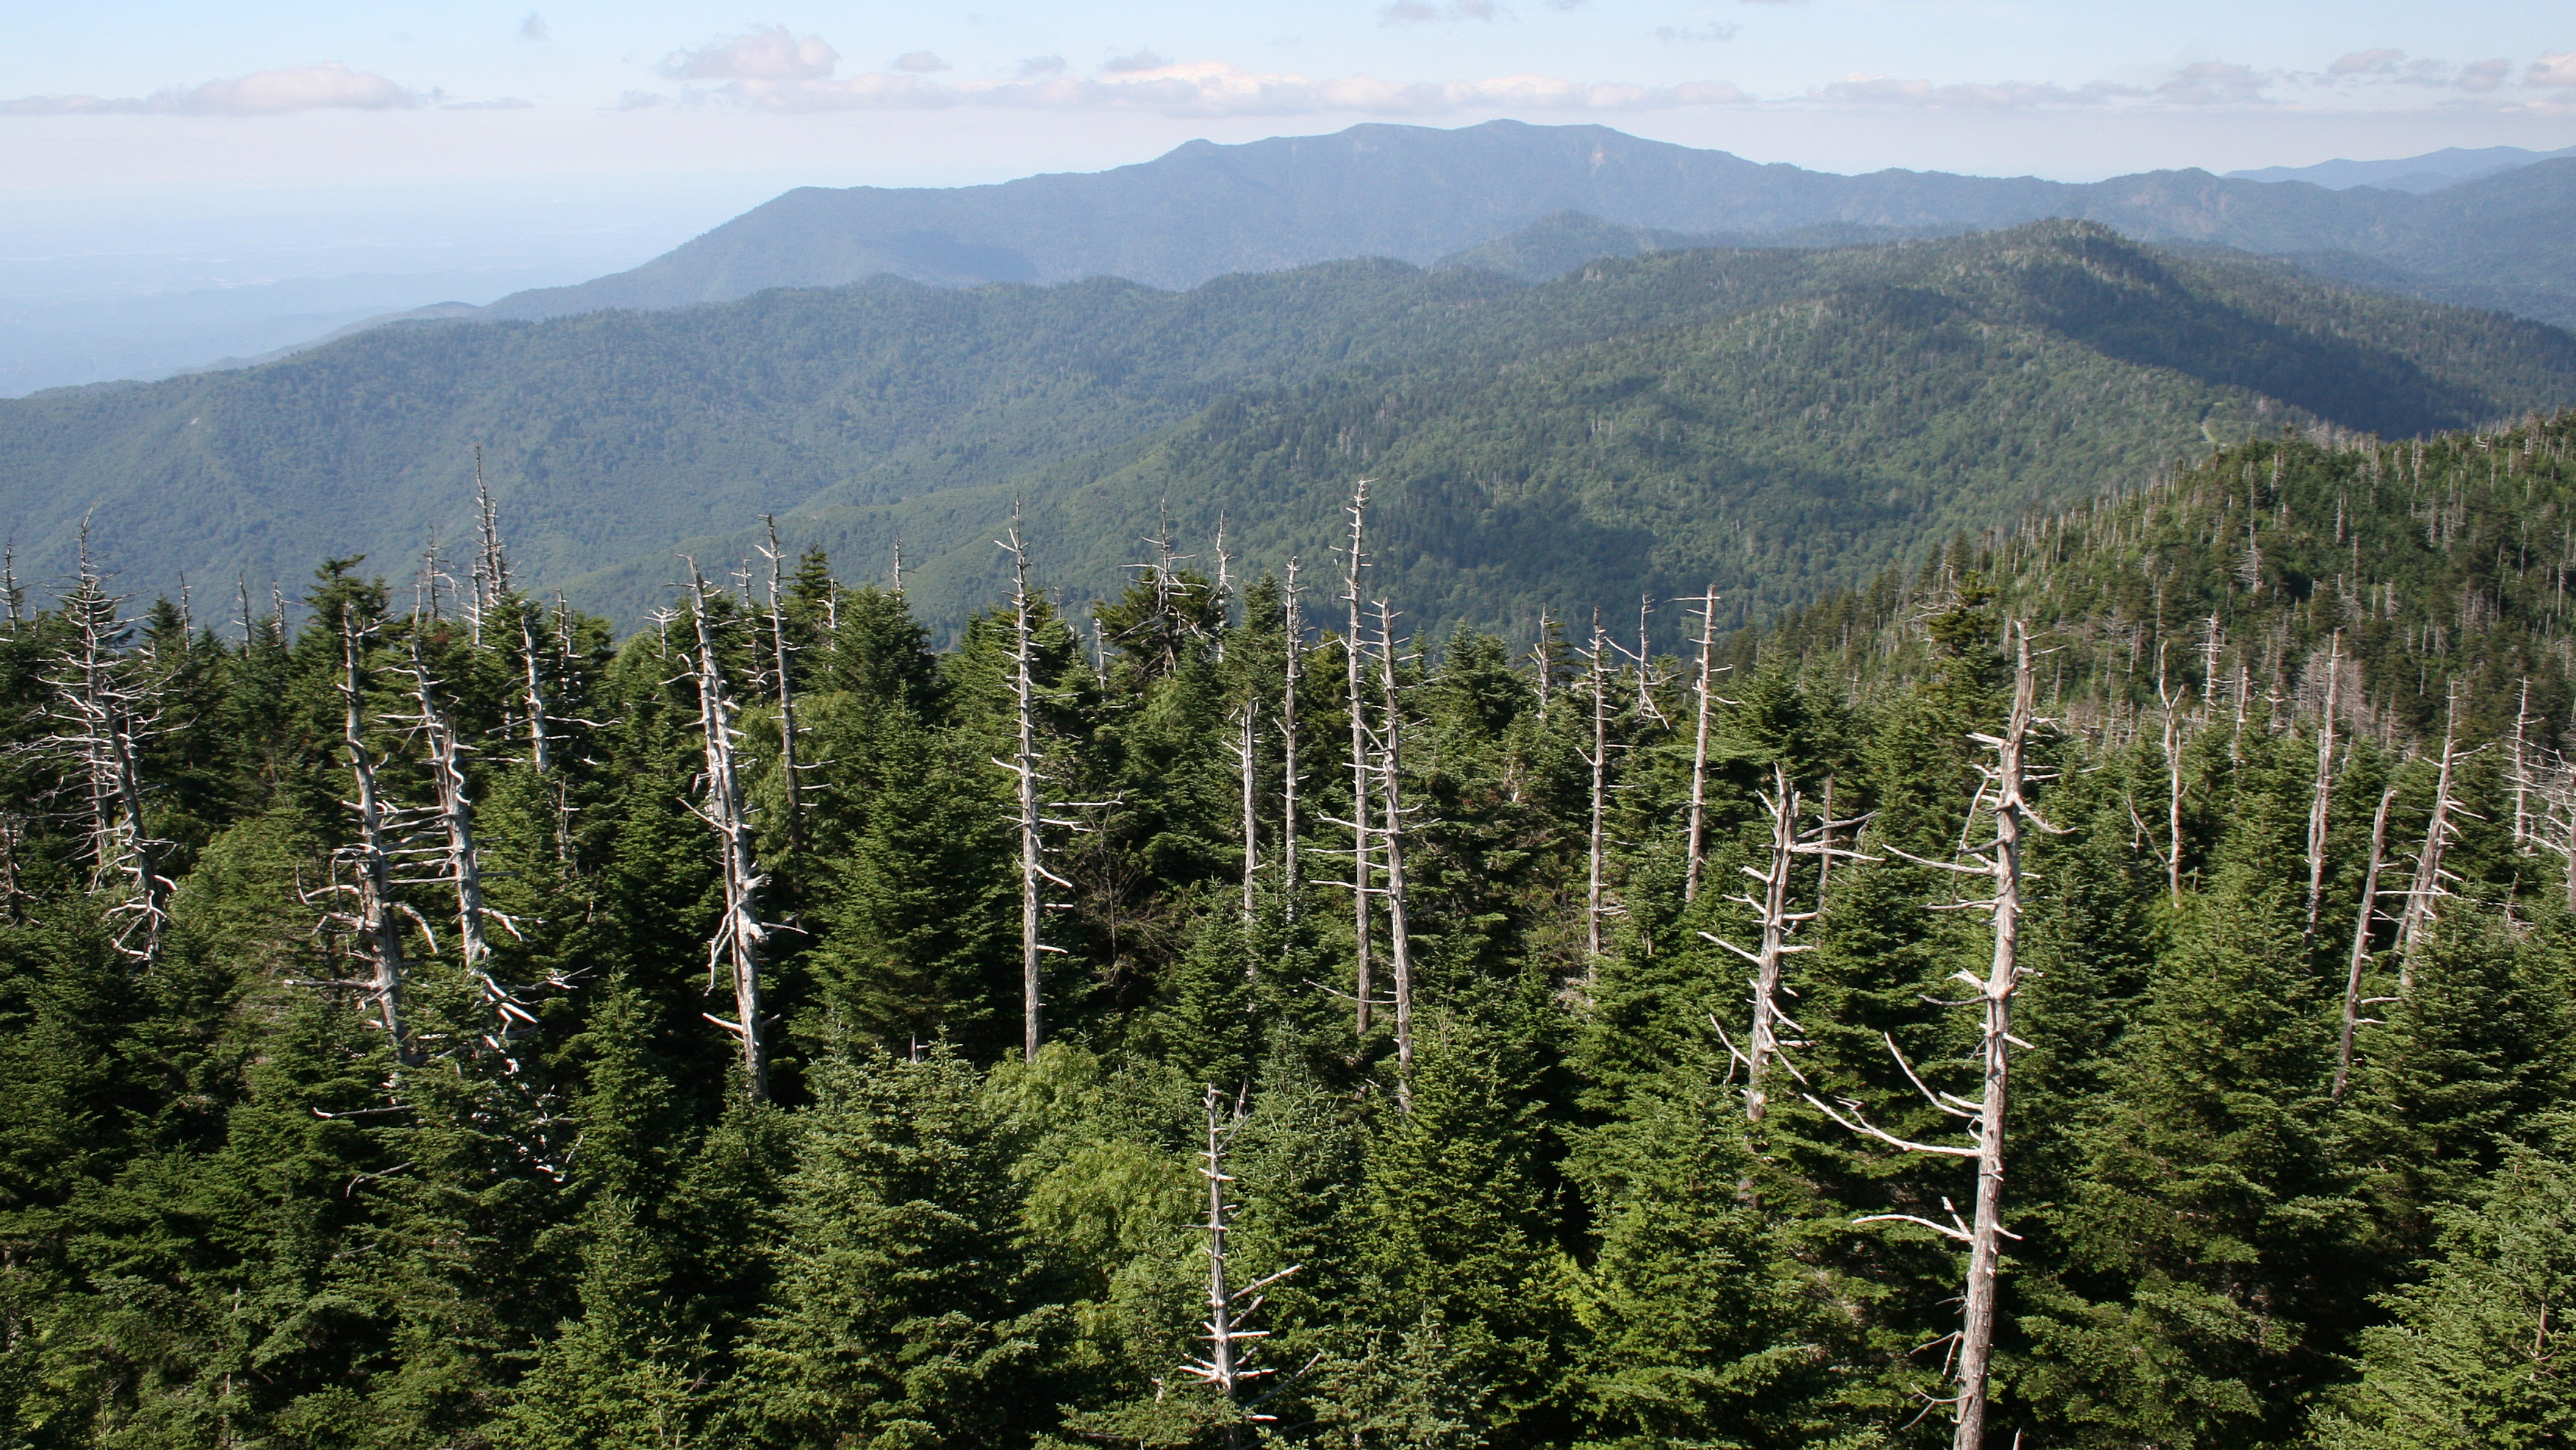 Skeletonized Fraser fir trees in the forest on the summit of Clingmans Dome in Great Smoky Mountains Mountains National Park.